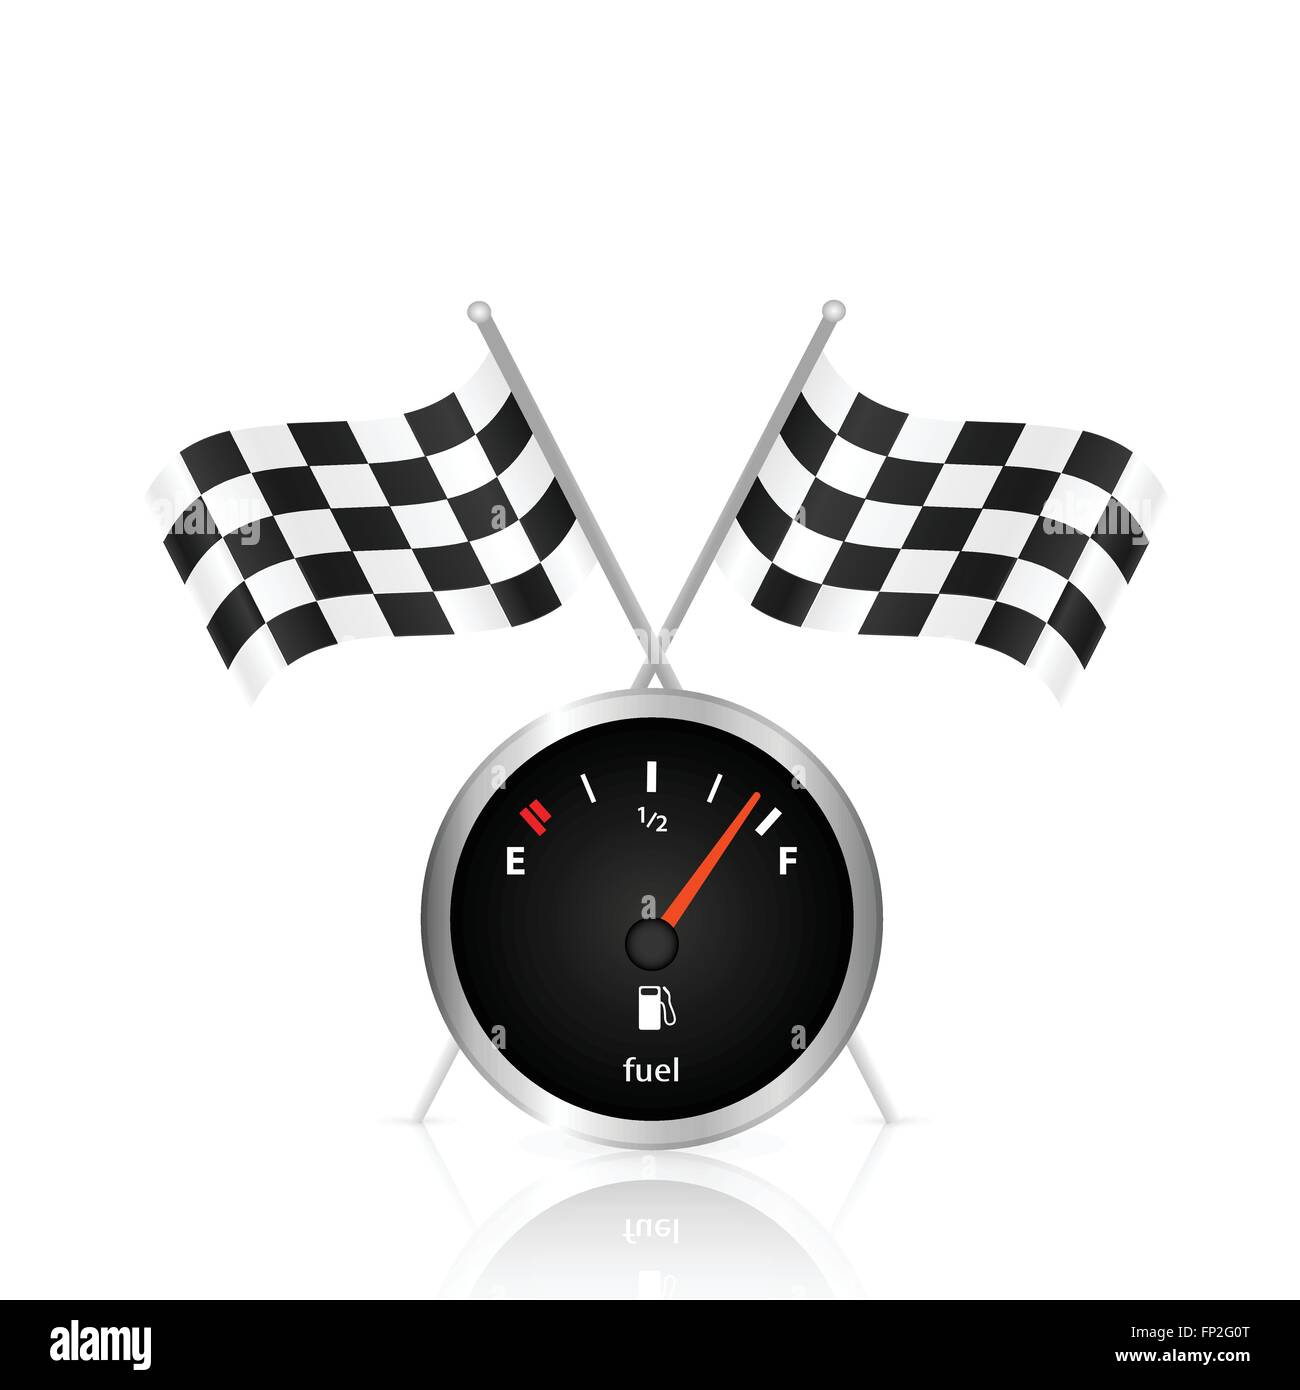 Illustration of a gas gage and checkered flags isolated on a white background. Stock Vector